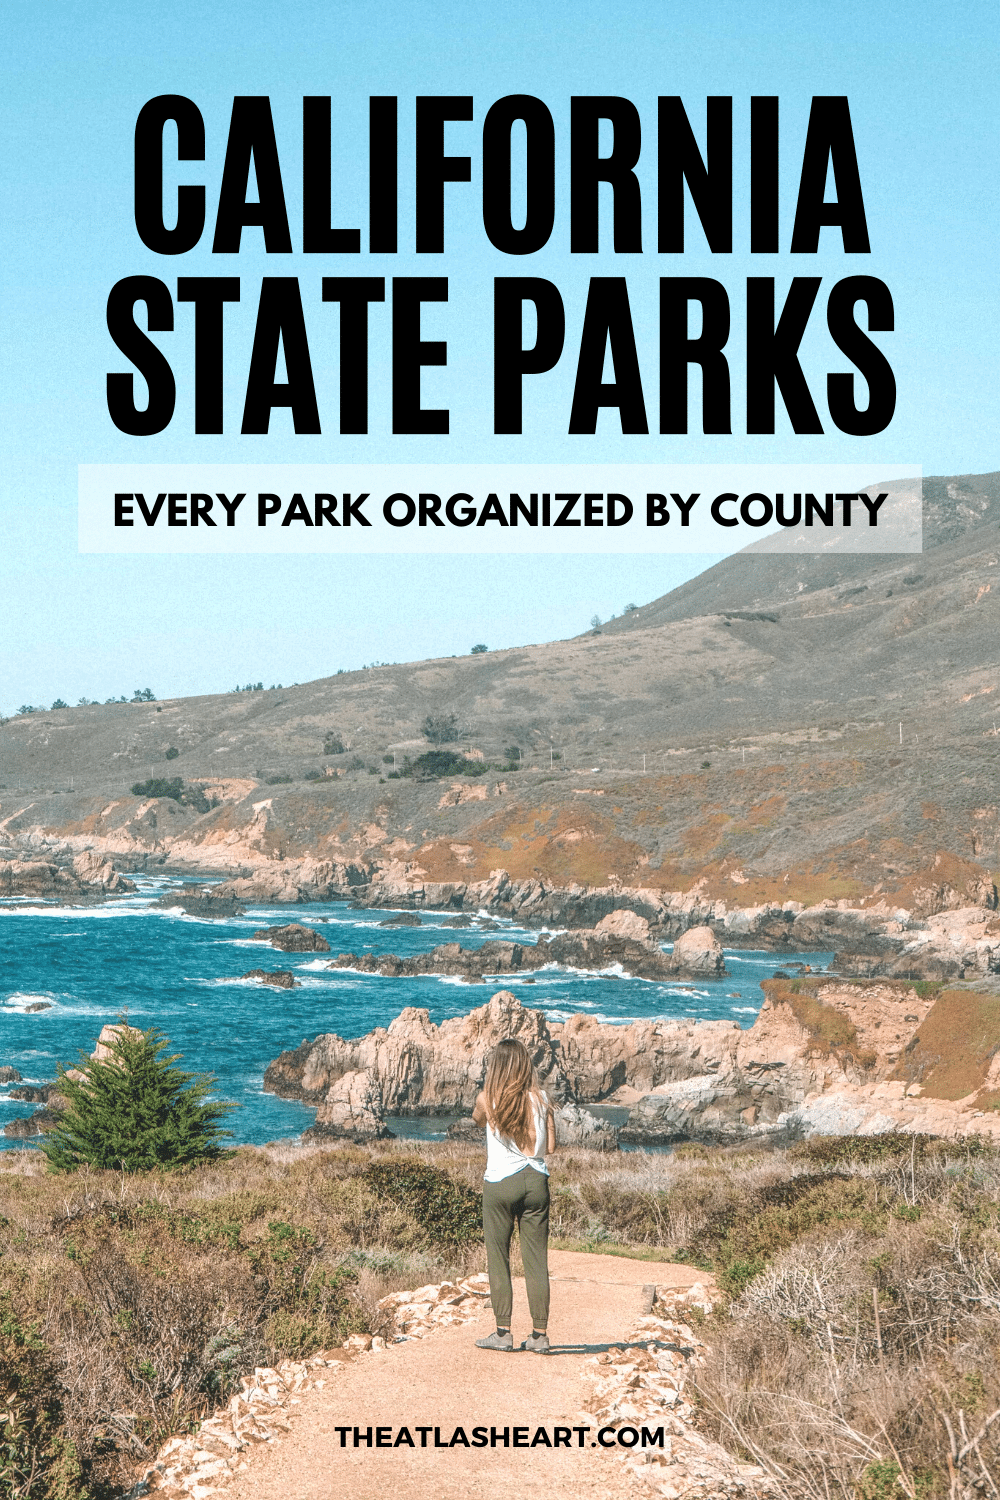 California State Parks List (Every Park Organized By County)